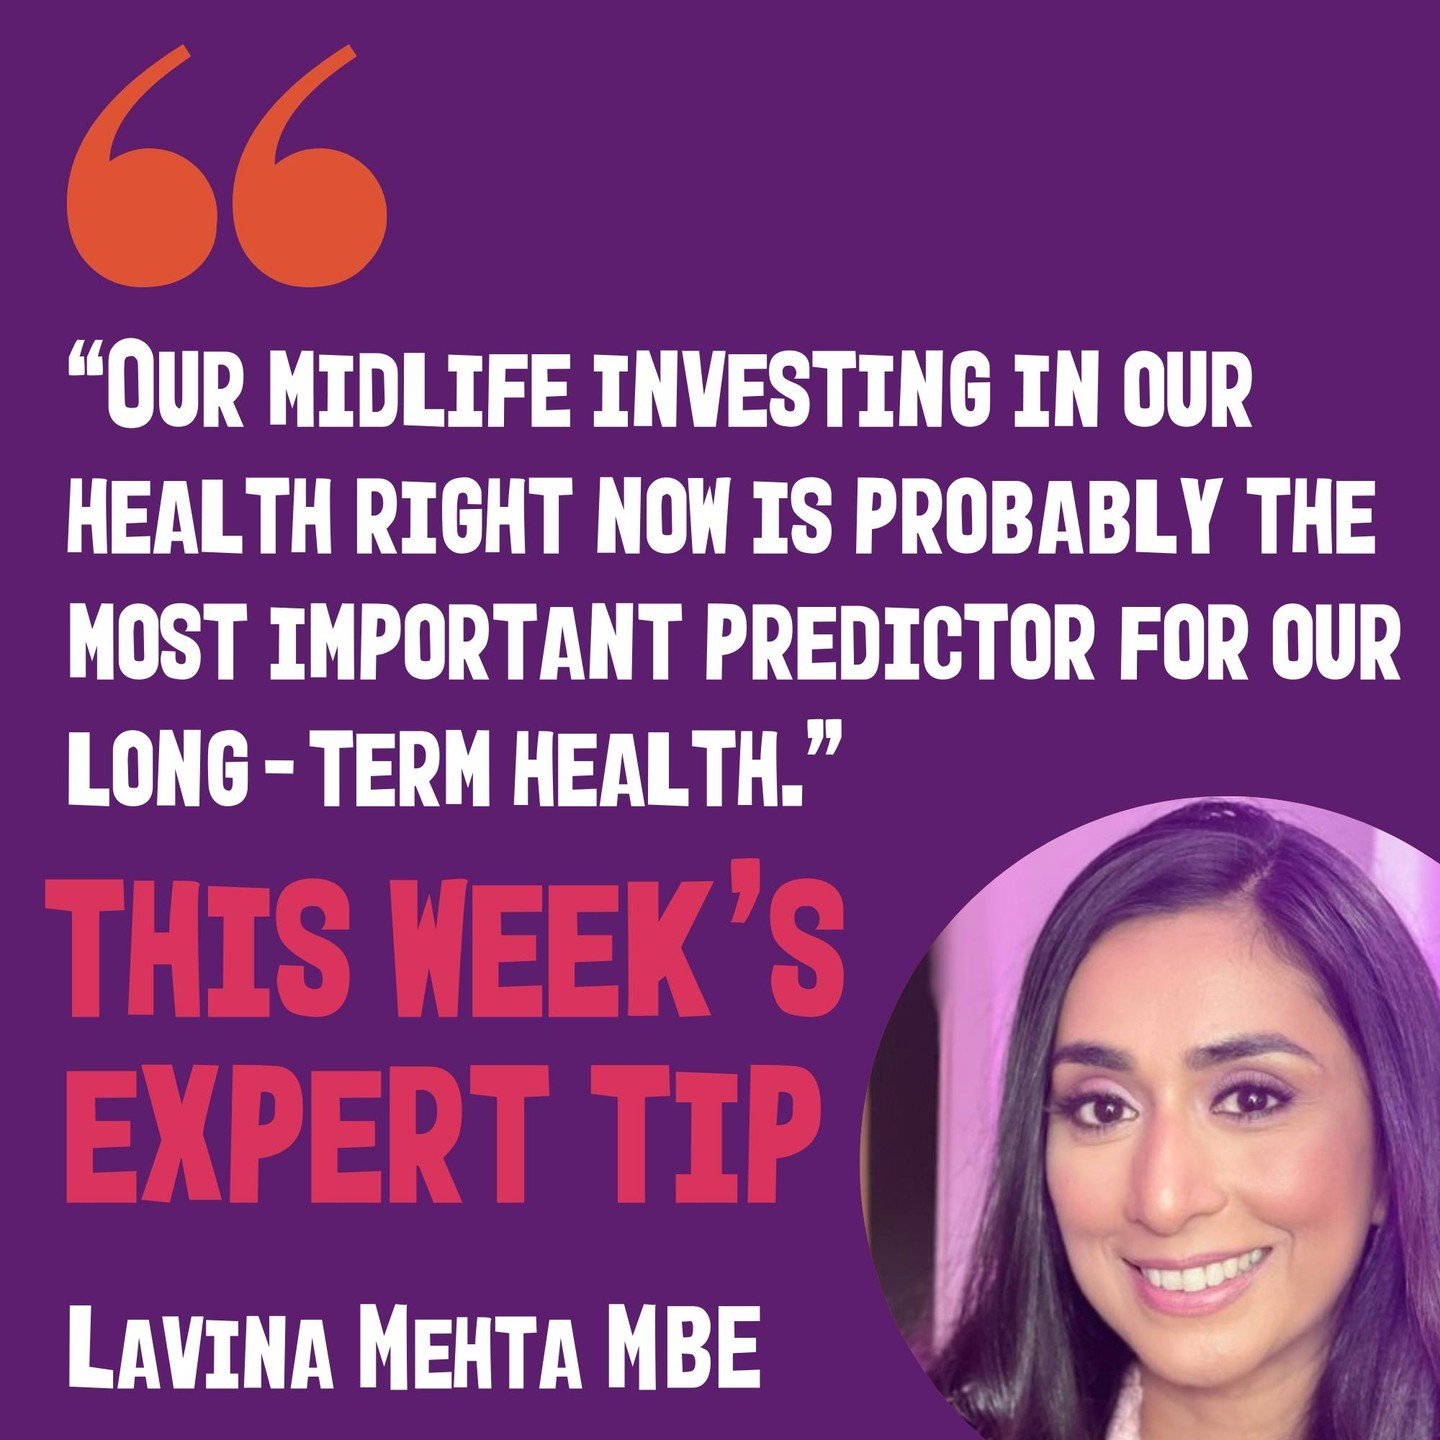 Lavina Mehta MBE is an award-winning Personal Trainer, MM Patron, and newly published author passionate about spreading the word on menopause, especially in small communities where there isn&rsquo;t even a word for it.

Lavina&rsquo;s mission is to h